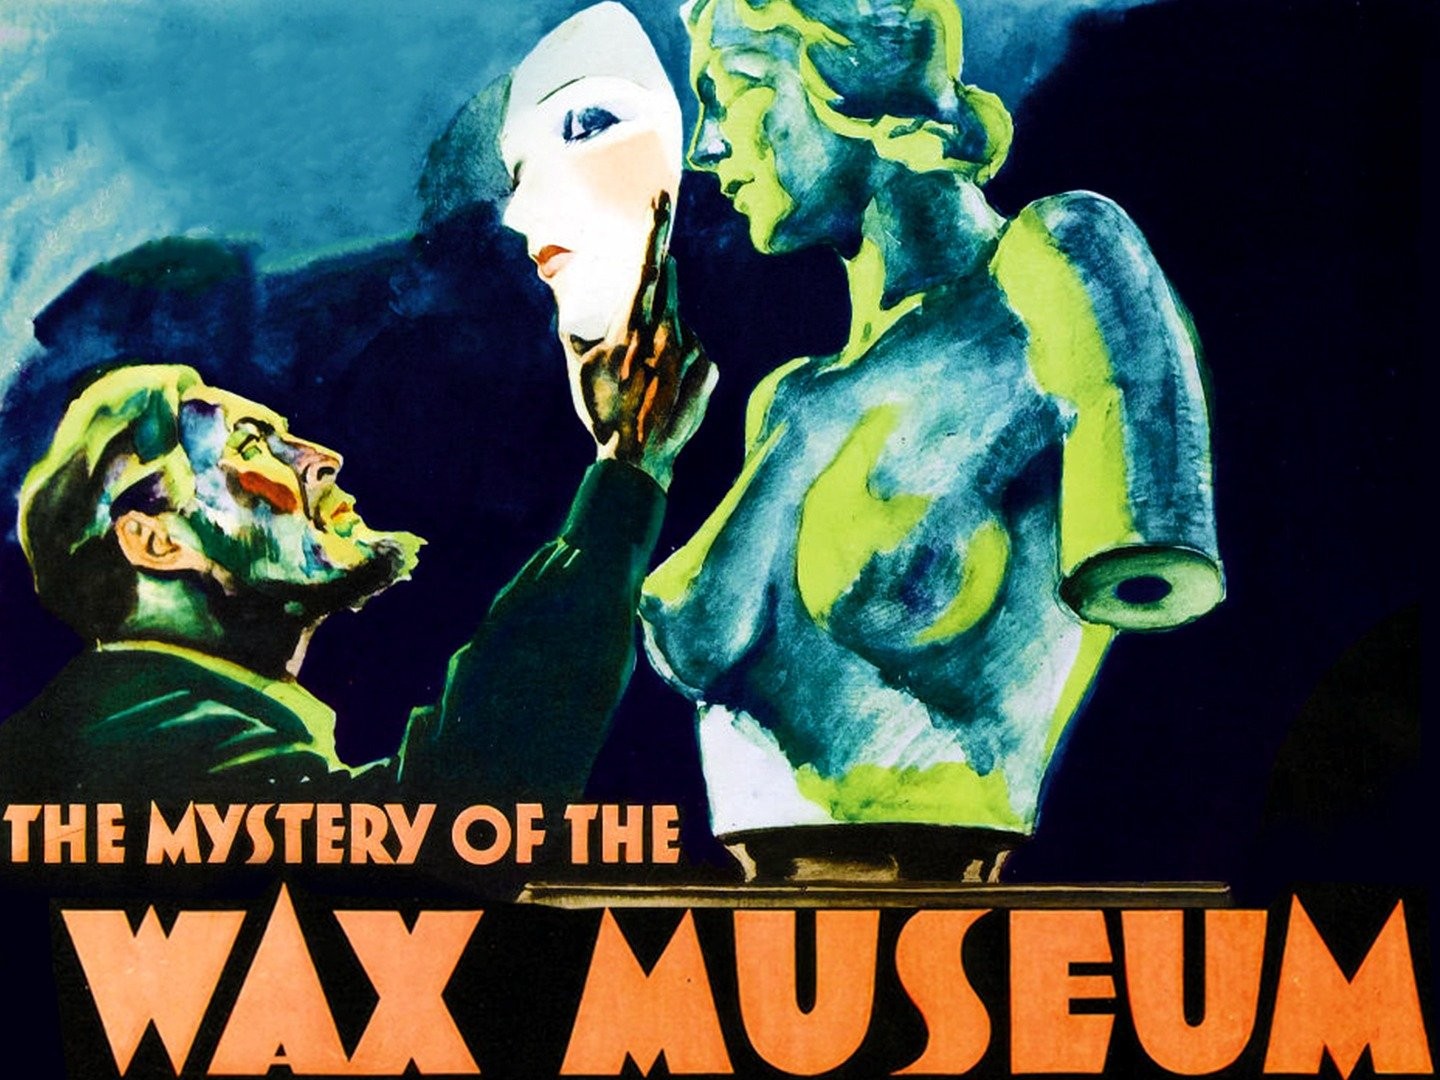 42-facts-about-the-movie-mystery-of-the-wax-museum